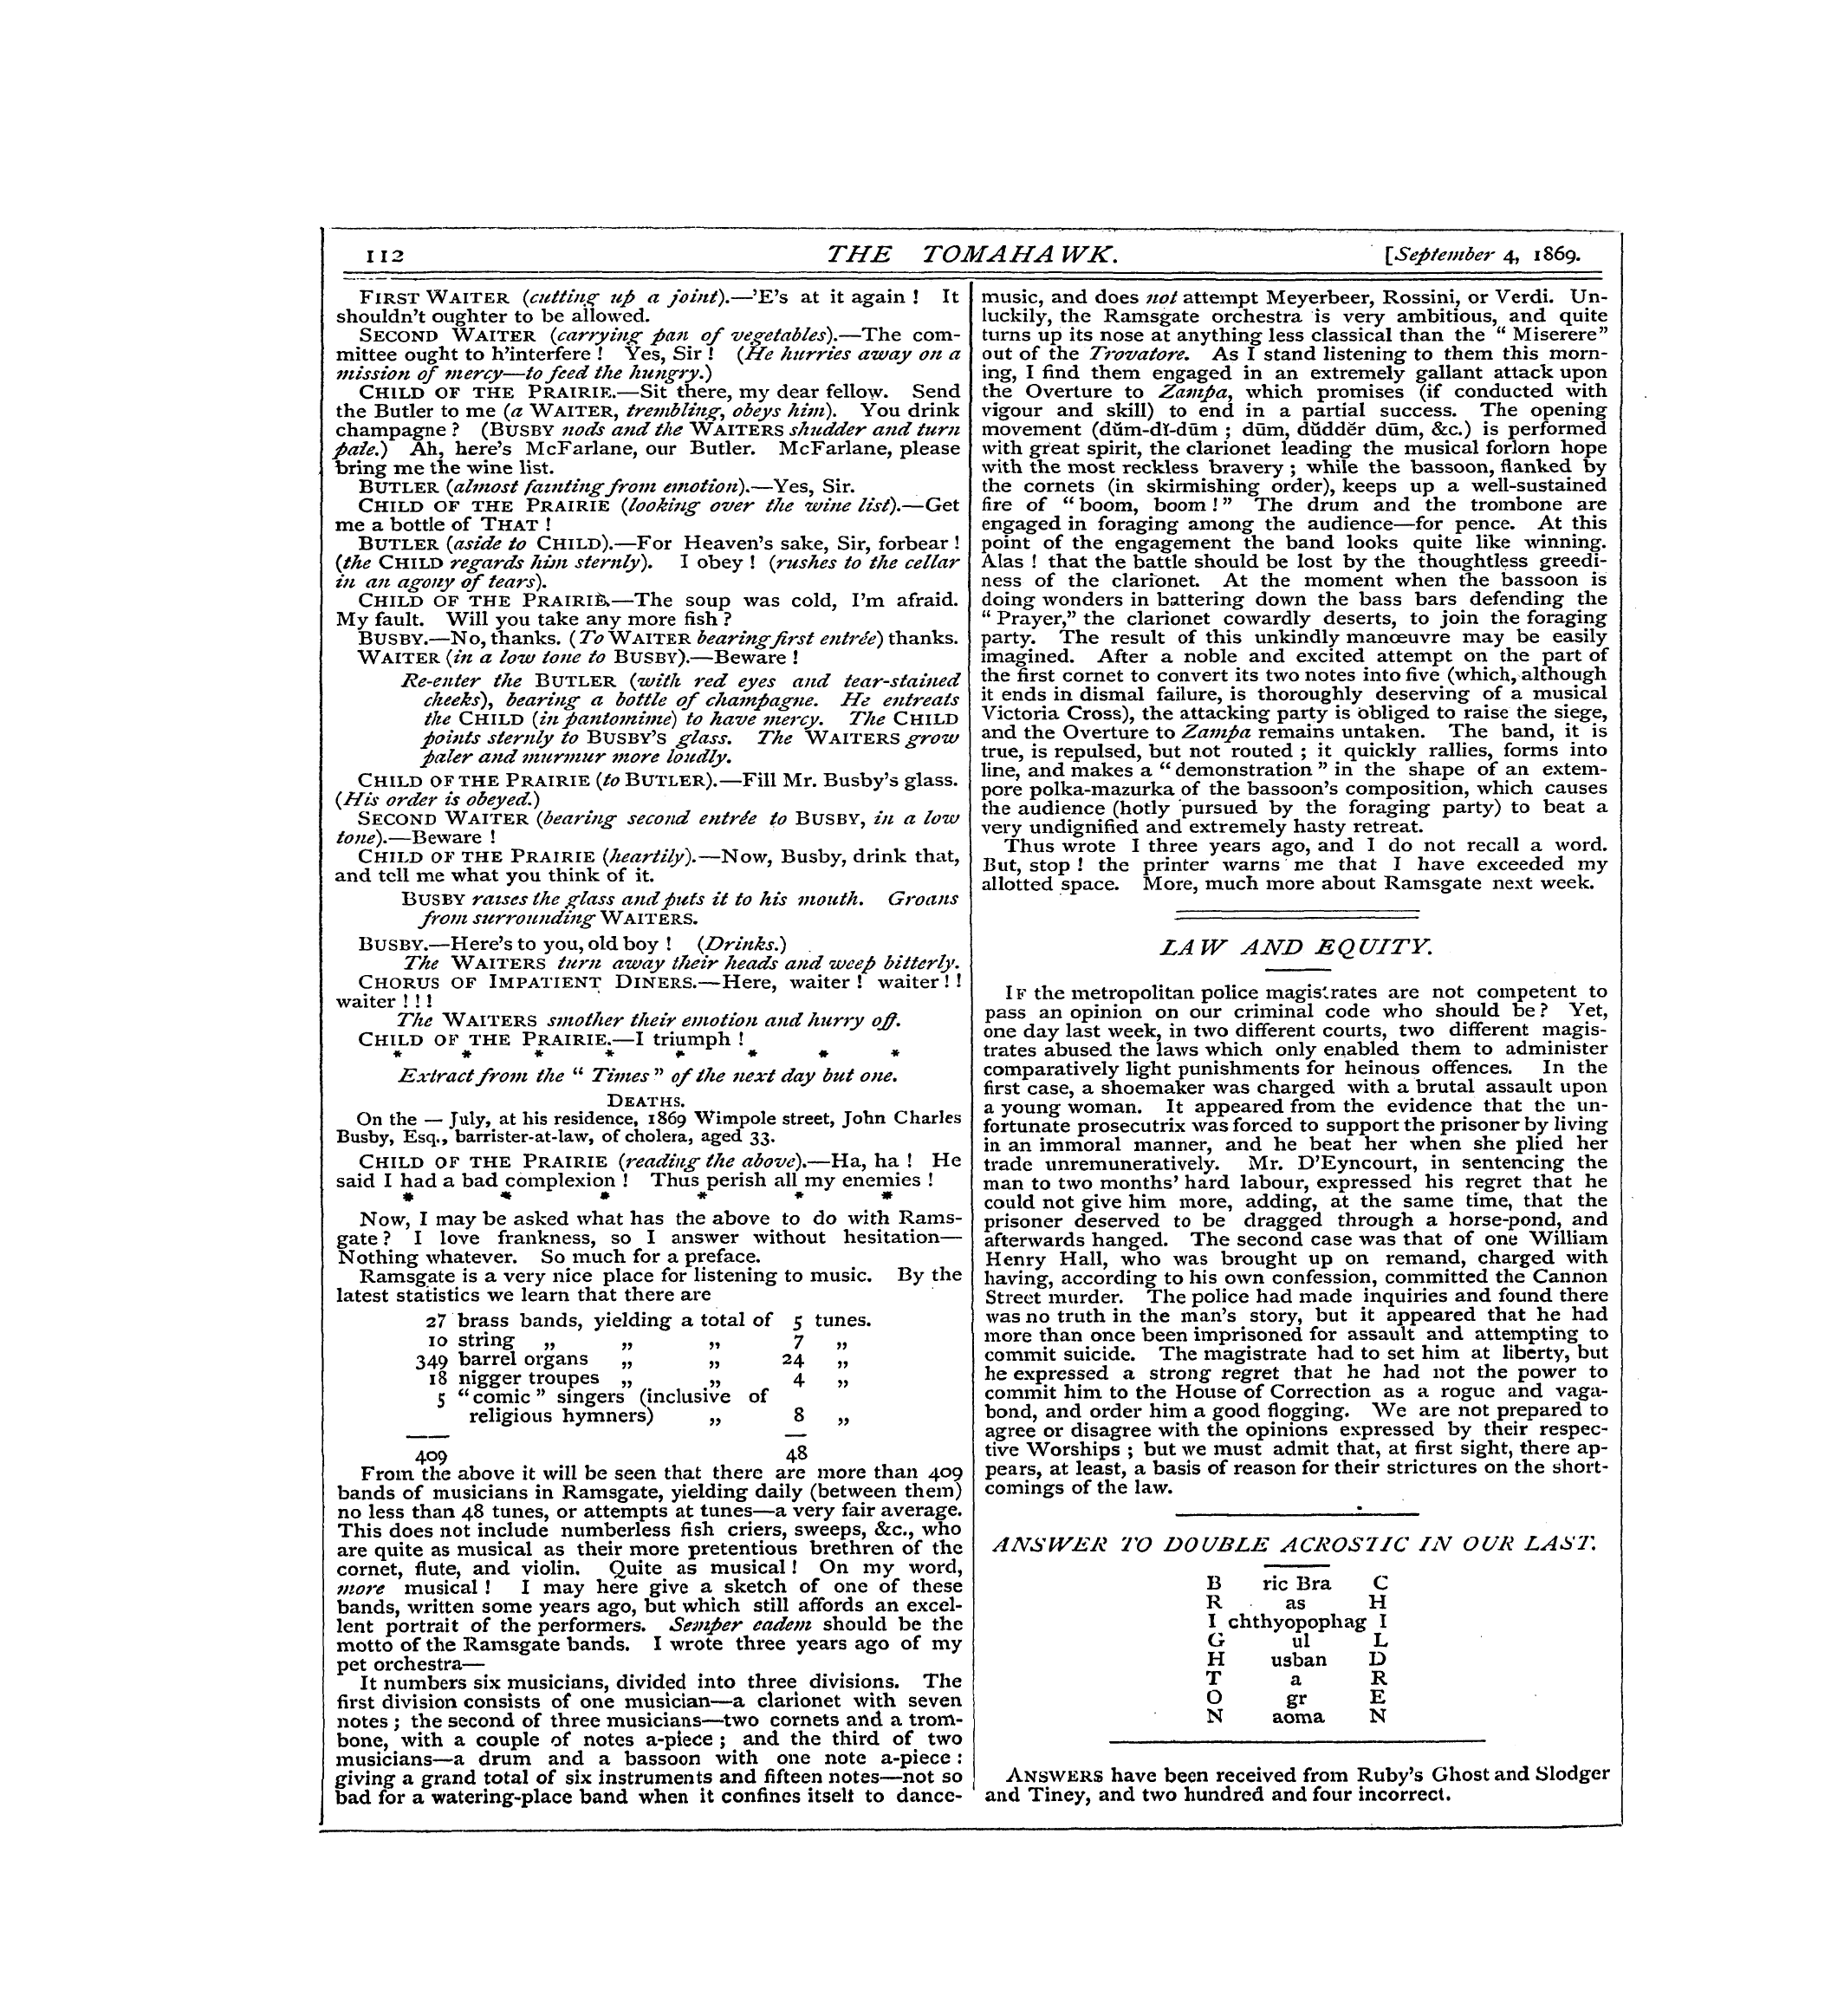 Tomahawk (1867-1870): jS F Y, 1st edition - Law And Equity.